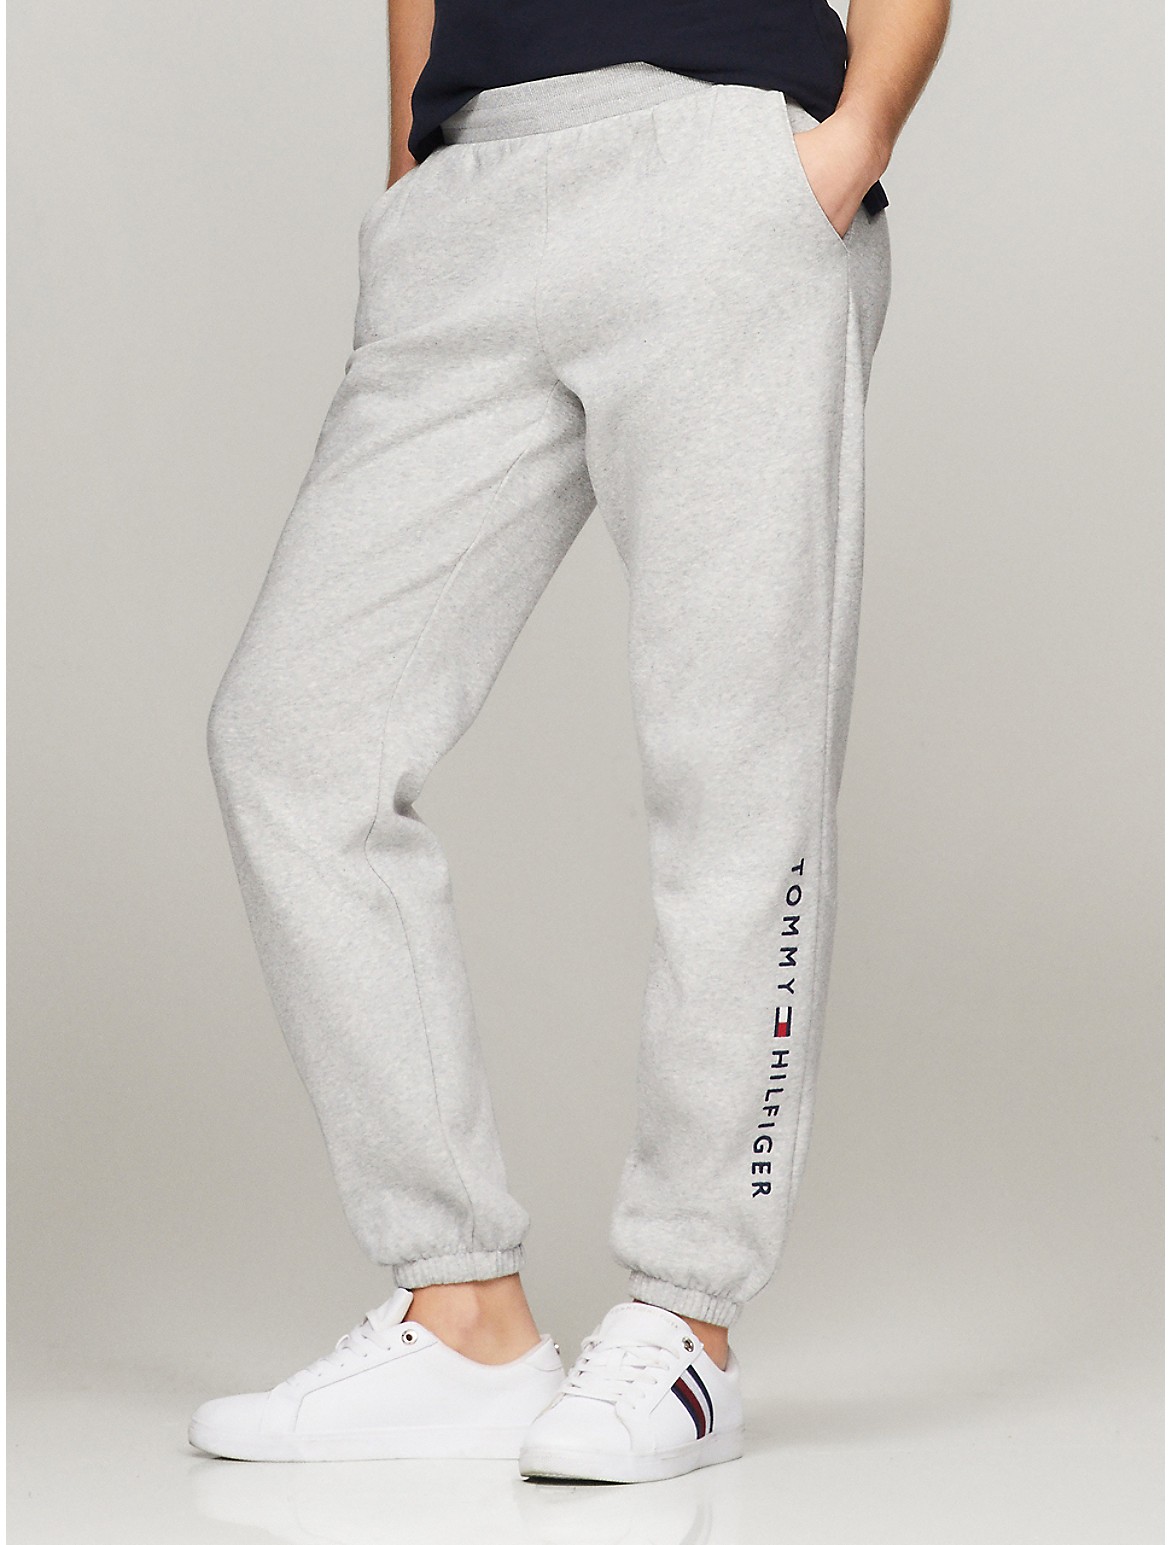 Tommy Hilfiger Women's Embroidered Tommy Logo Sweatpant